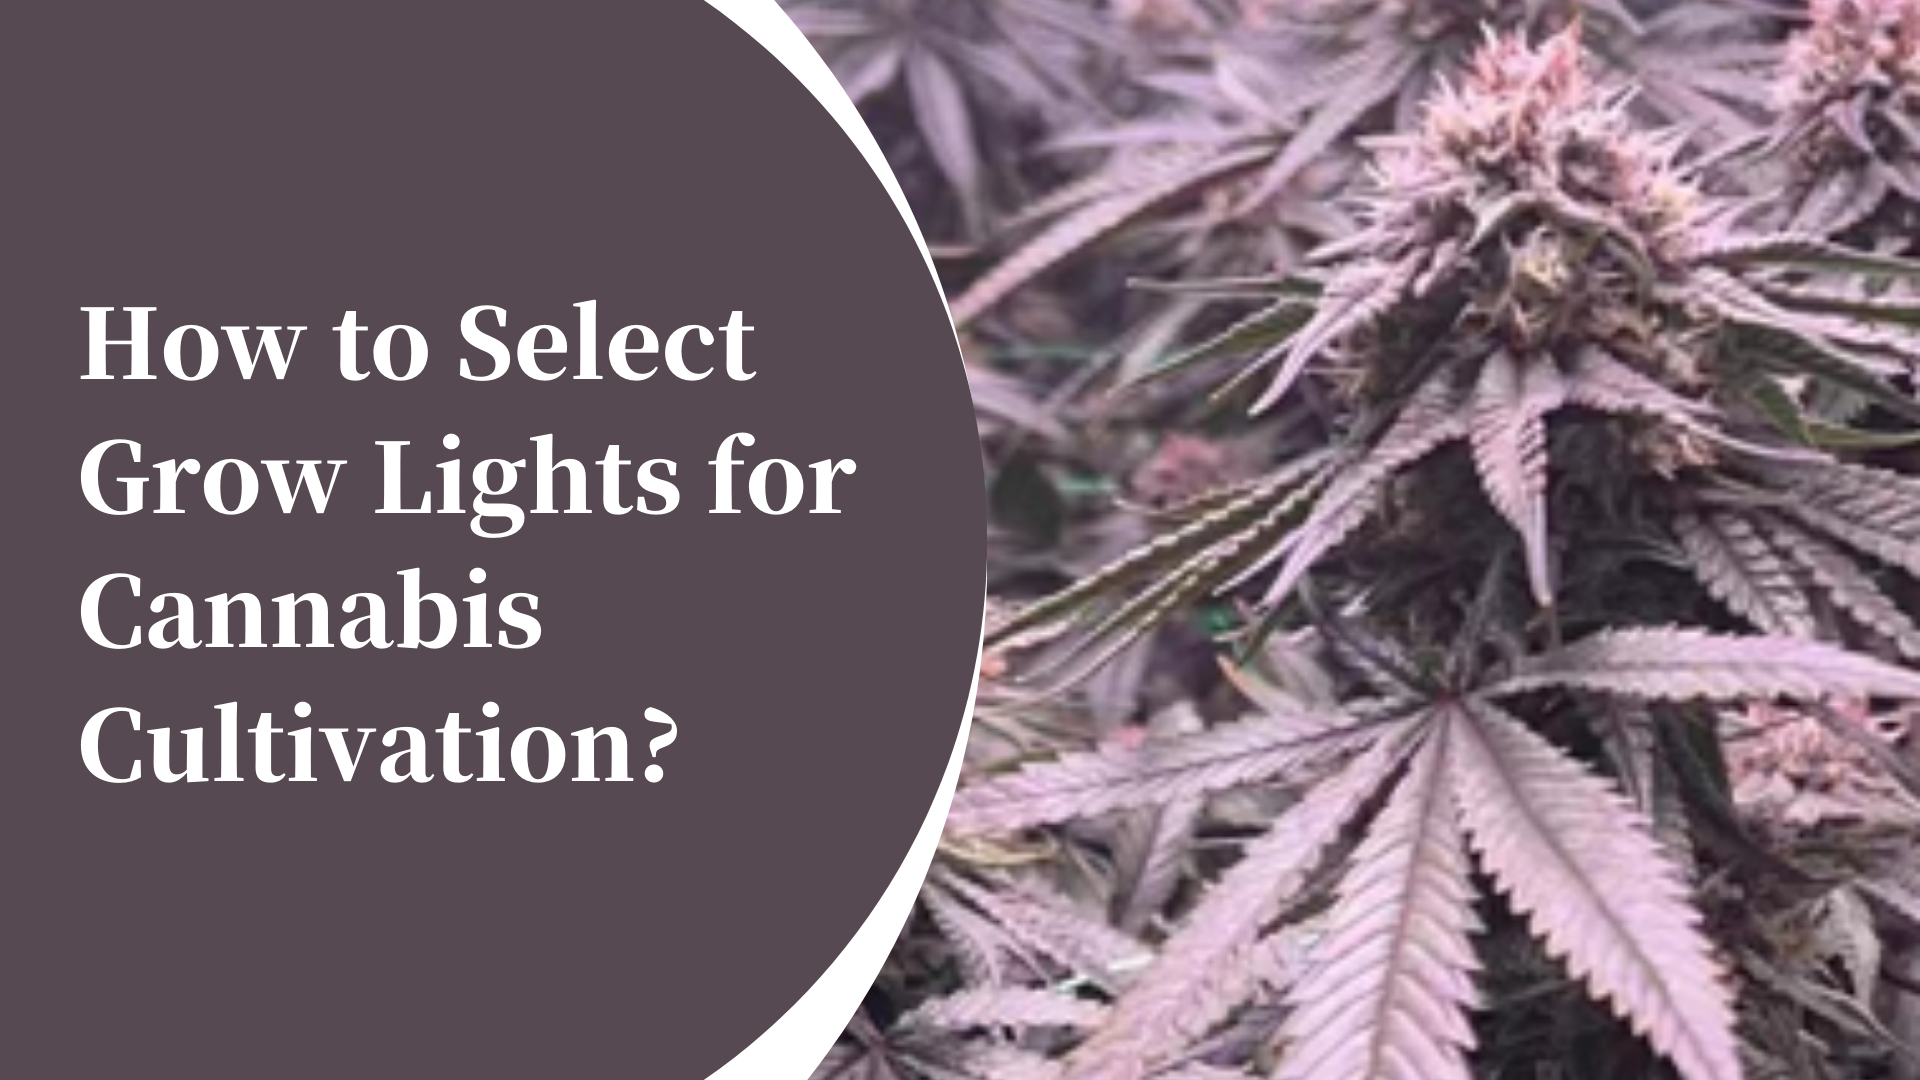 How to Select Grow Lights for Cannabis Cultivation?